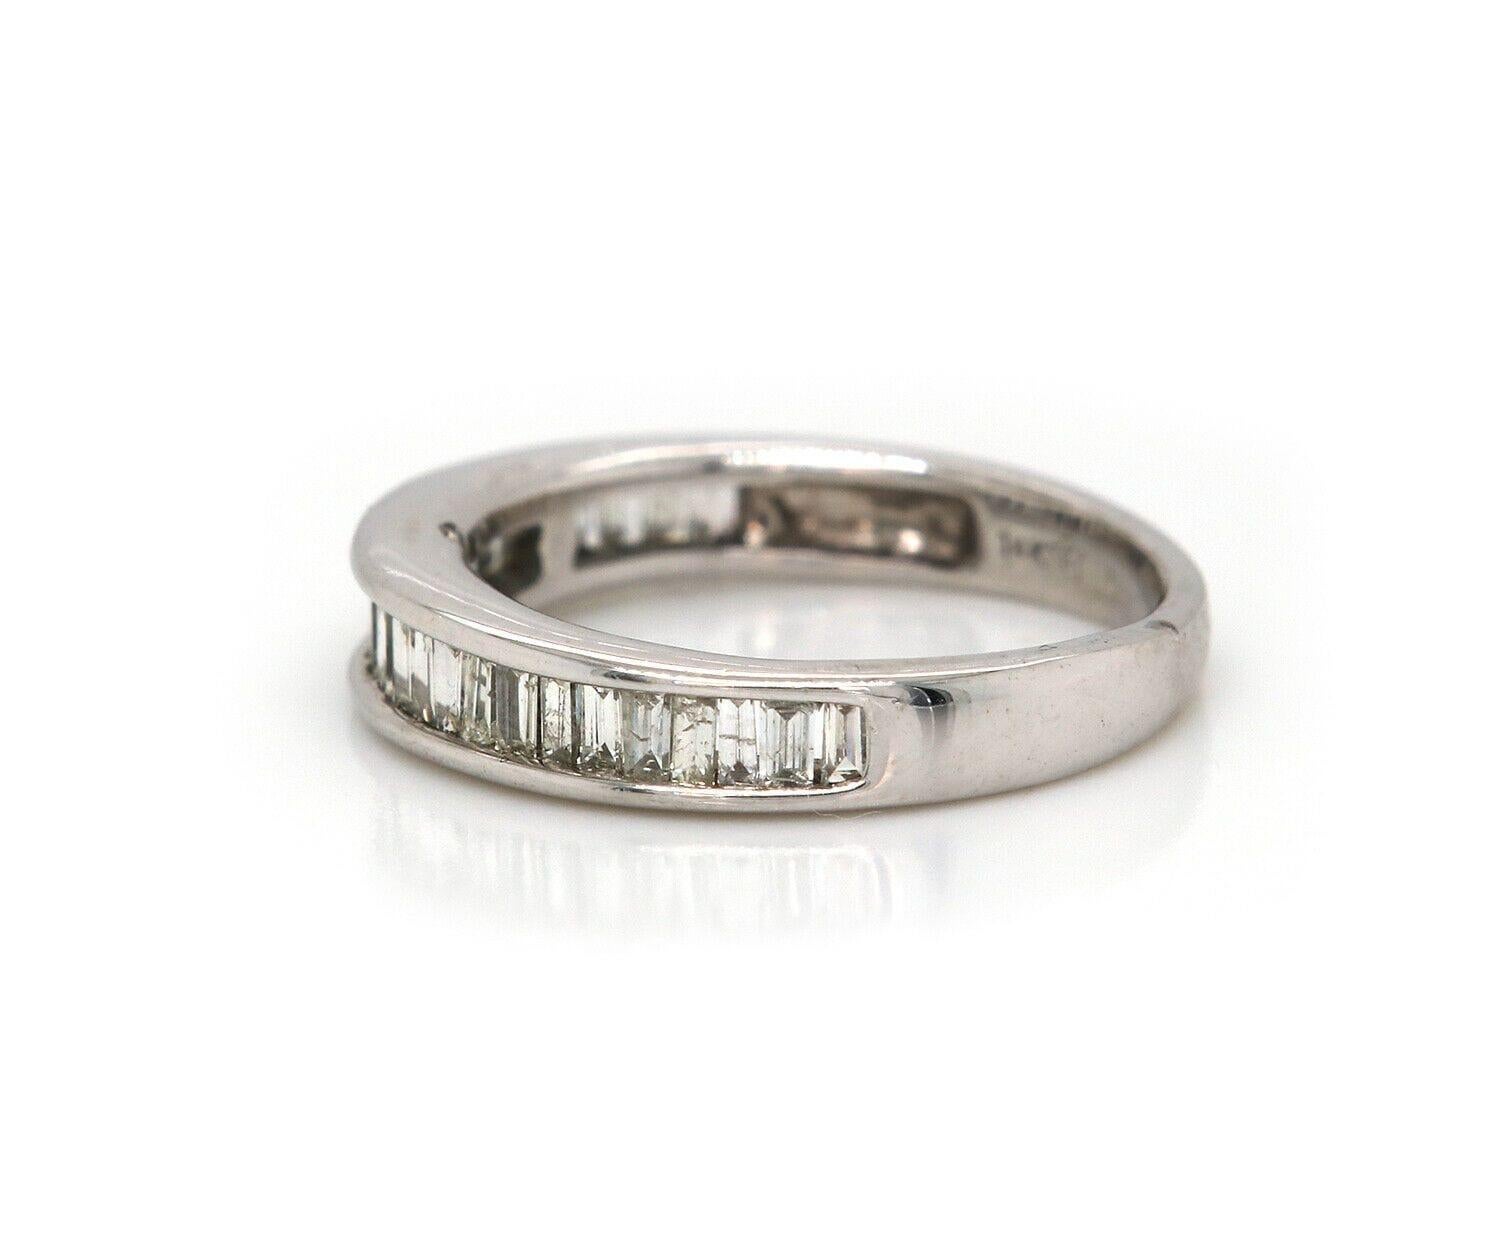 0.50ctw Baguette Diamond Wedding Band Ring in 14K

Baguette Diamond Wedding Band Ring
14K White Gold
Diamonds Carat Weight: Approx. 0.50ctw
Band Width: Approx. 2.4 – 4.2 MM
Ring Size: 5.0 (US)
Weight: Approx. 8.80 Grams
Stamped: